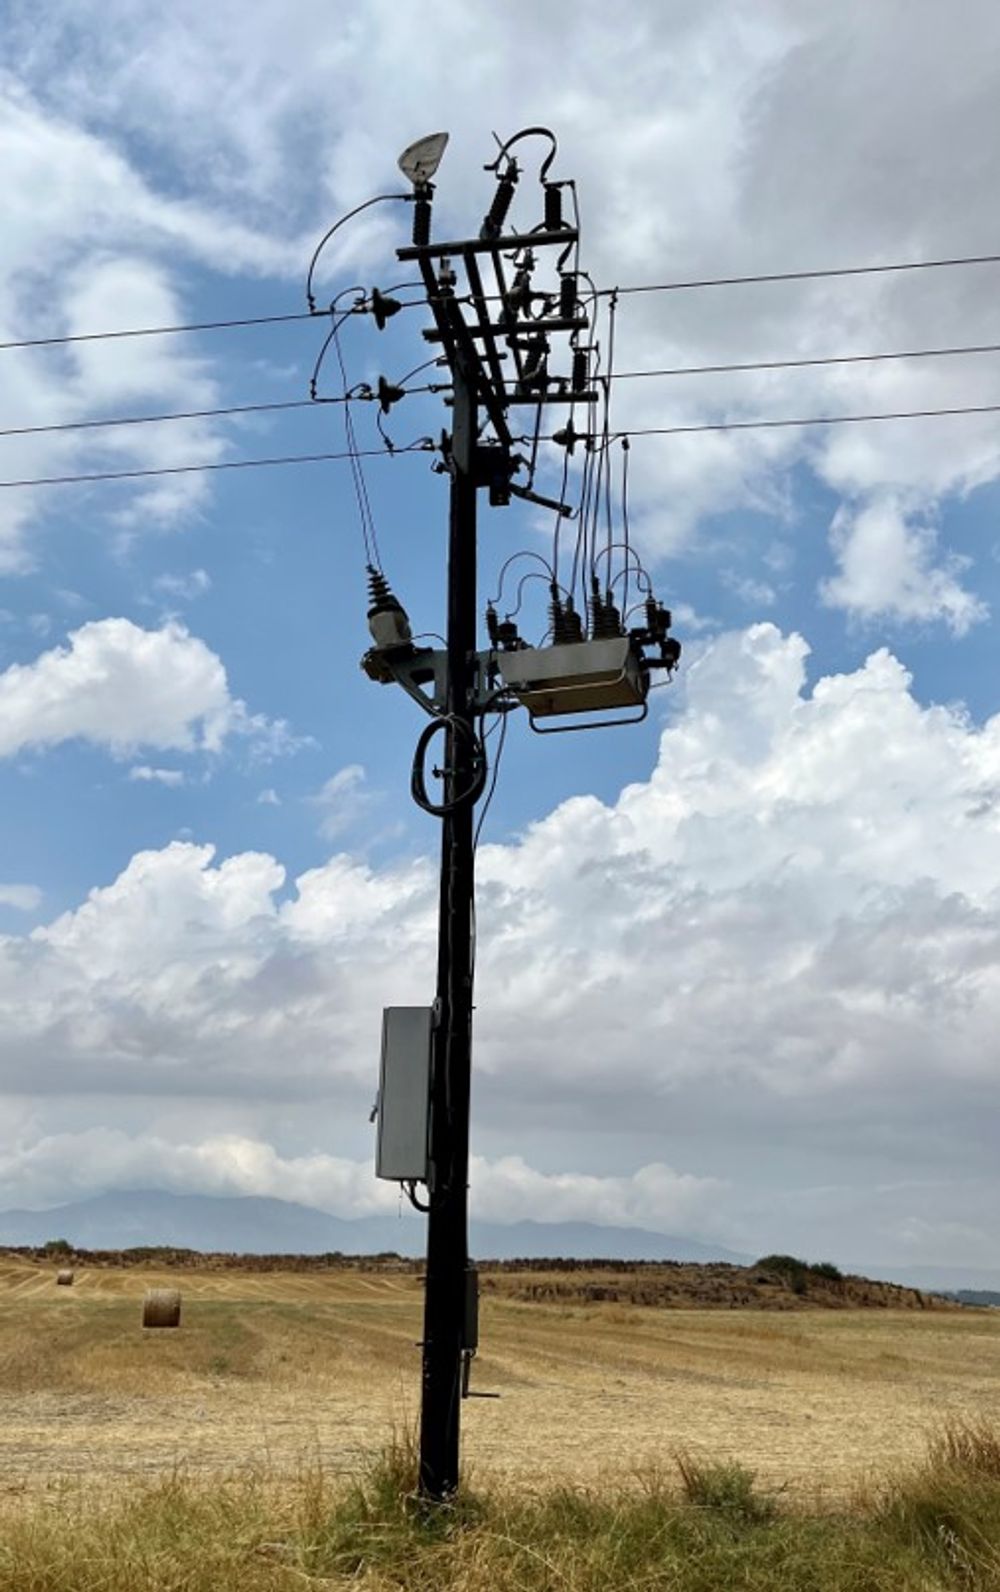 An OSM Recloser installation with the Standard OMB-18 mounting bracket for the OSM, and a VTMB-10 for the auxiliary supply voltage transformer.